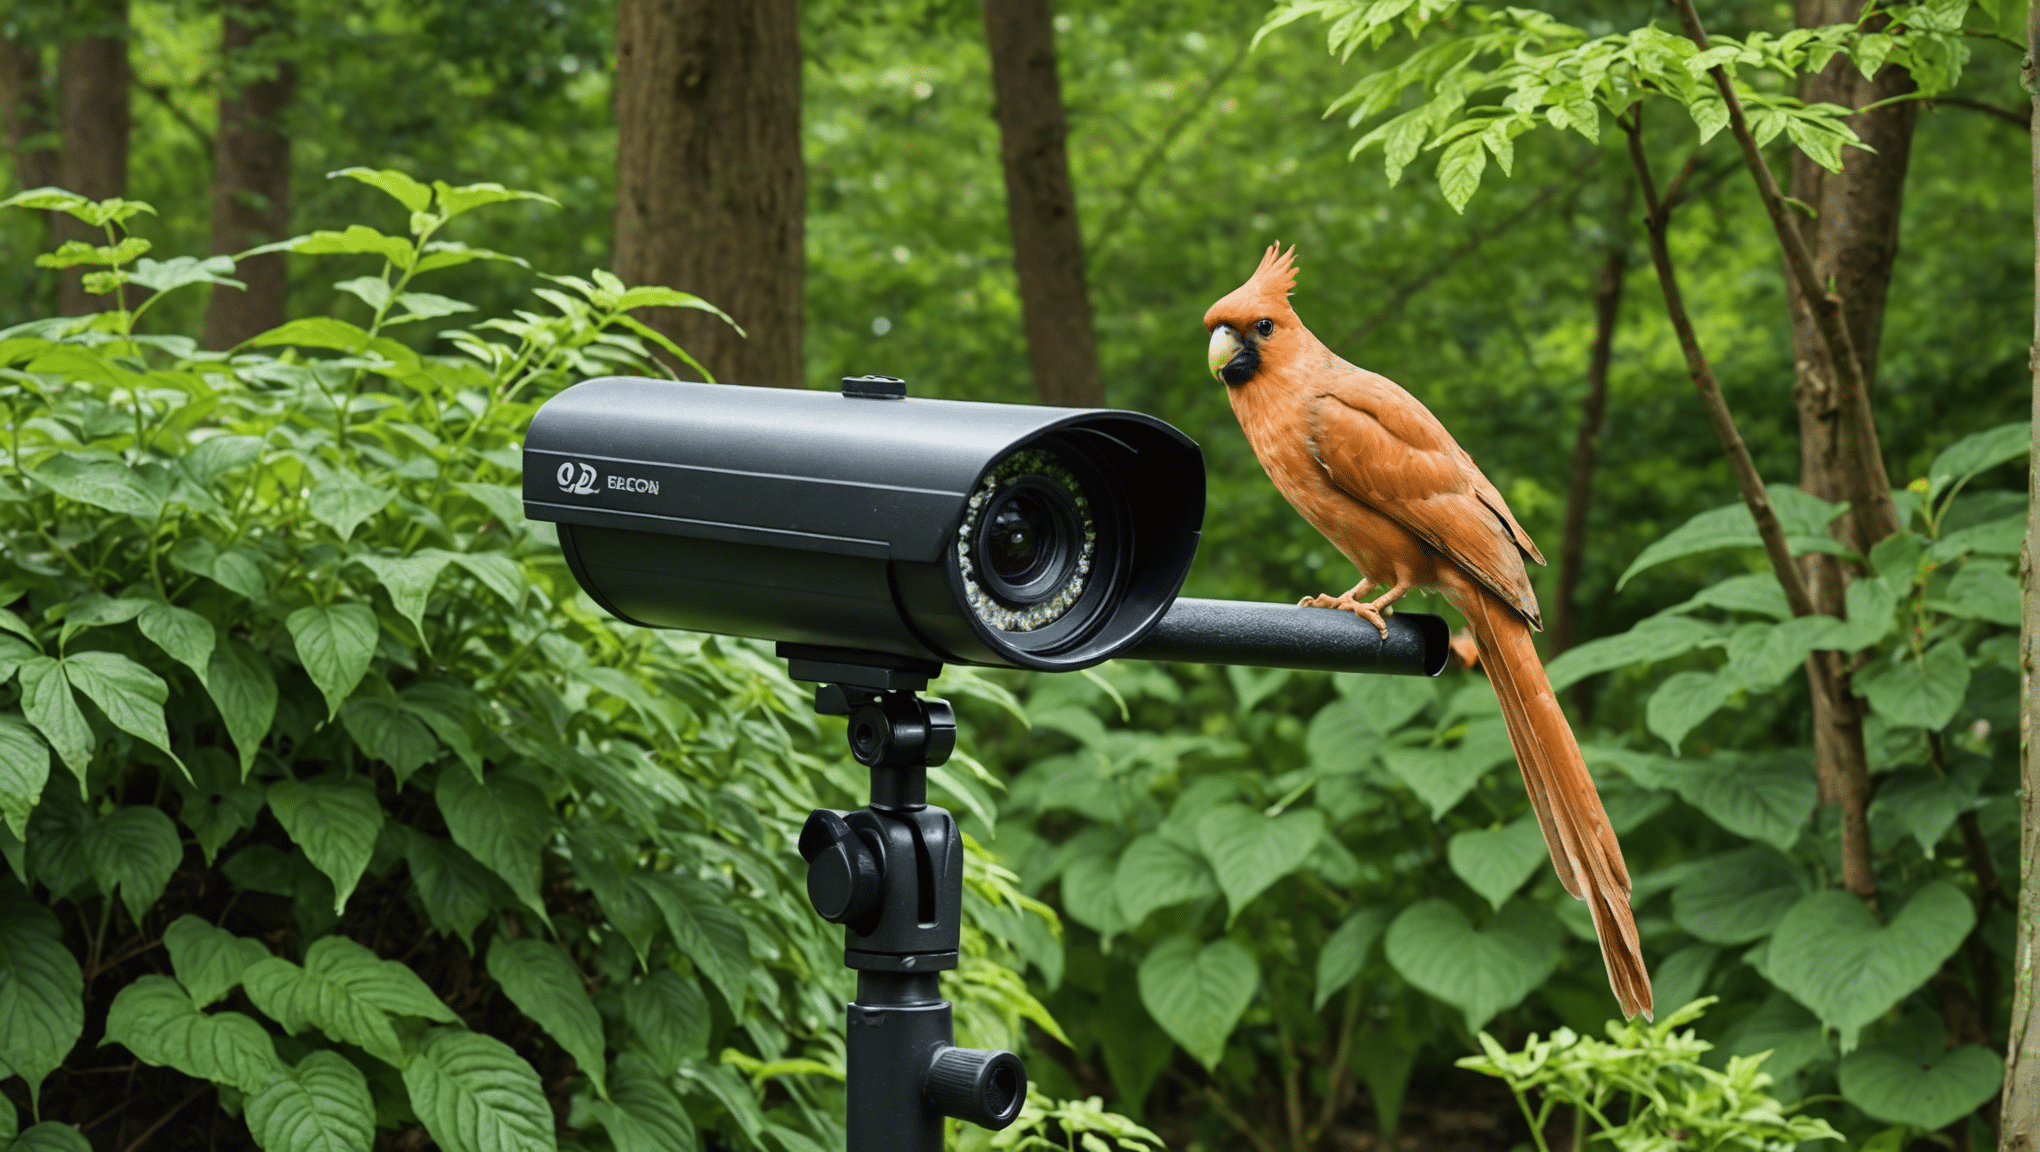 backyard cameras capturing animals in action - explore the excitement of wildlife in your own backyard with our cutting-edge cameras.